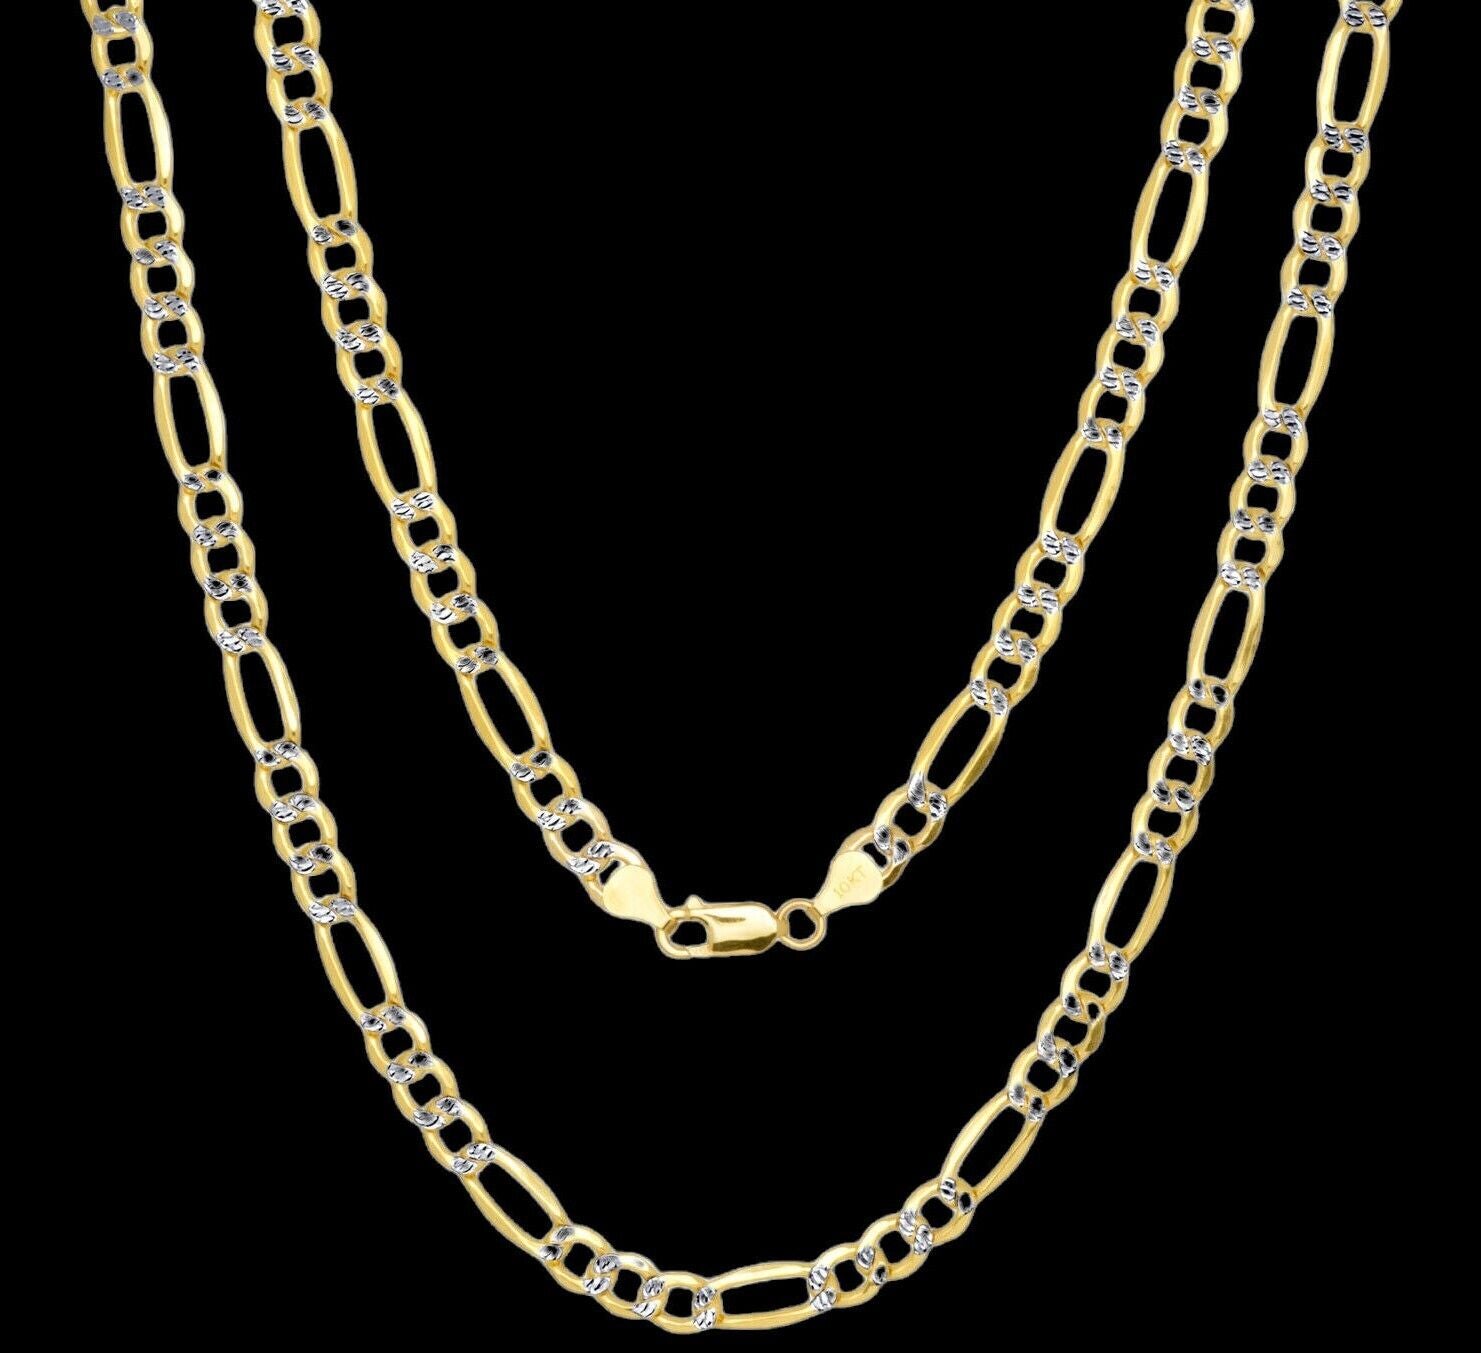 Real 10k Gold Chain Figaro Link Necklace 3.5mm-9mm, Men Women 18